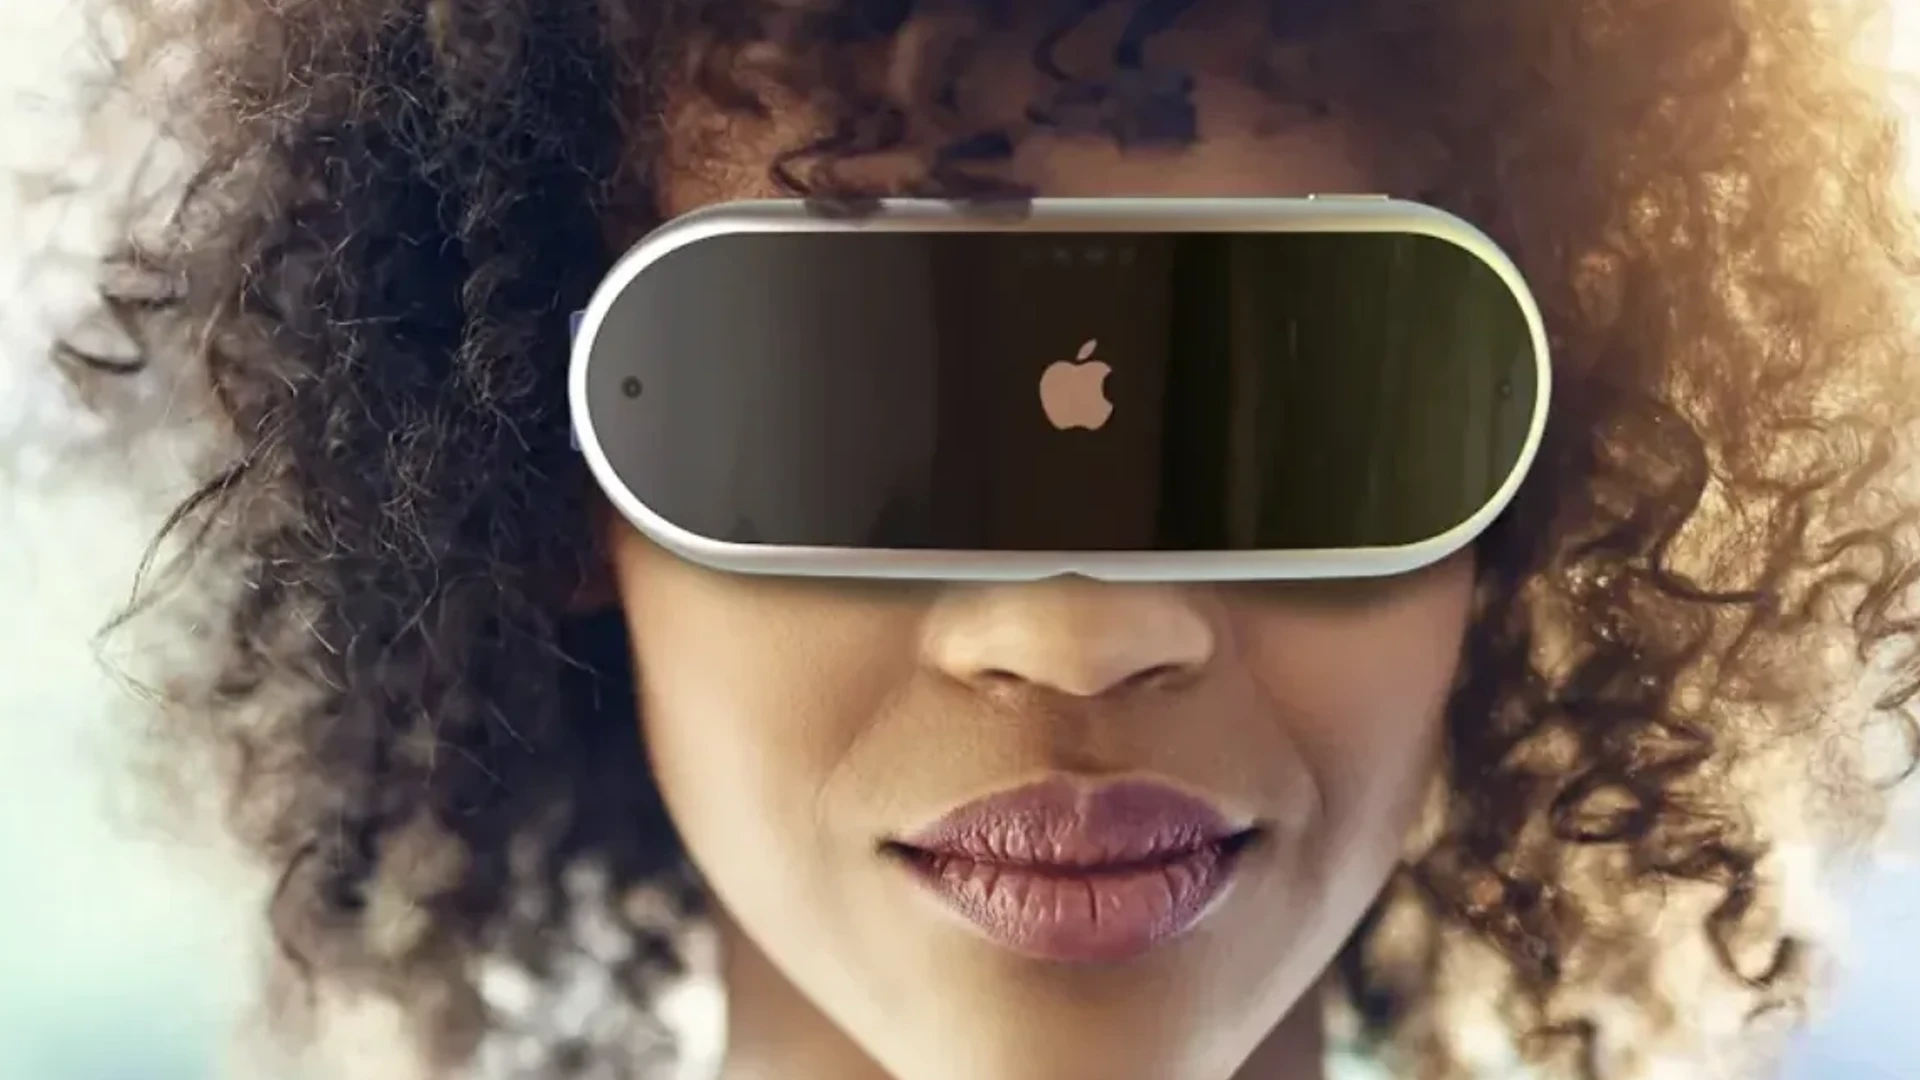 Apple’s Mixed Reality Headset Will Hit The Market By 2022